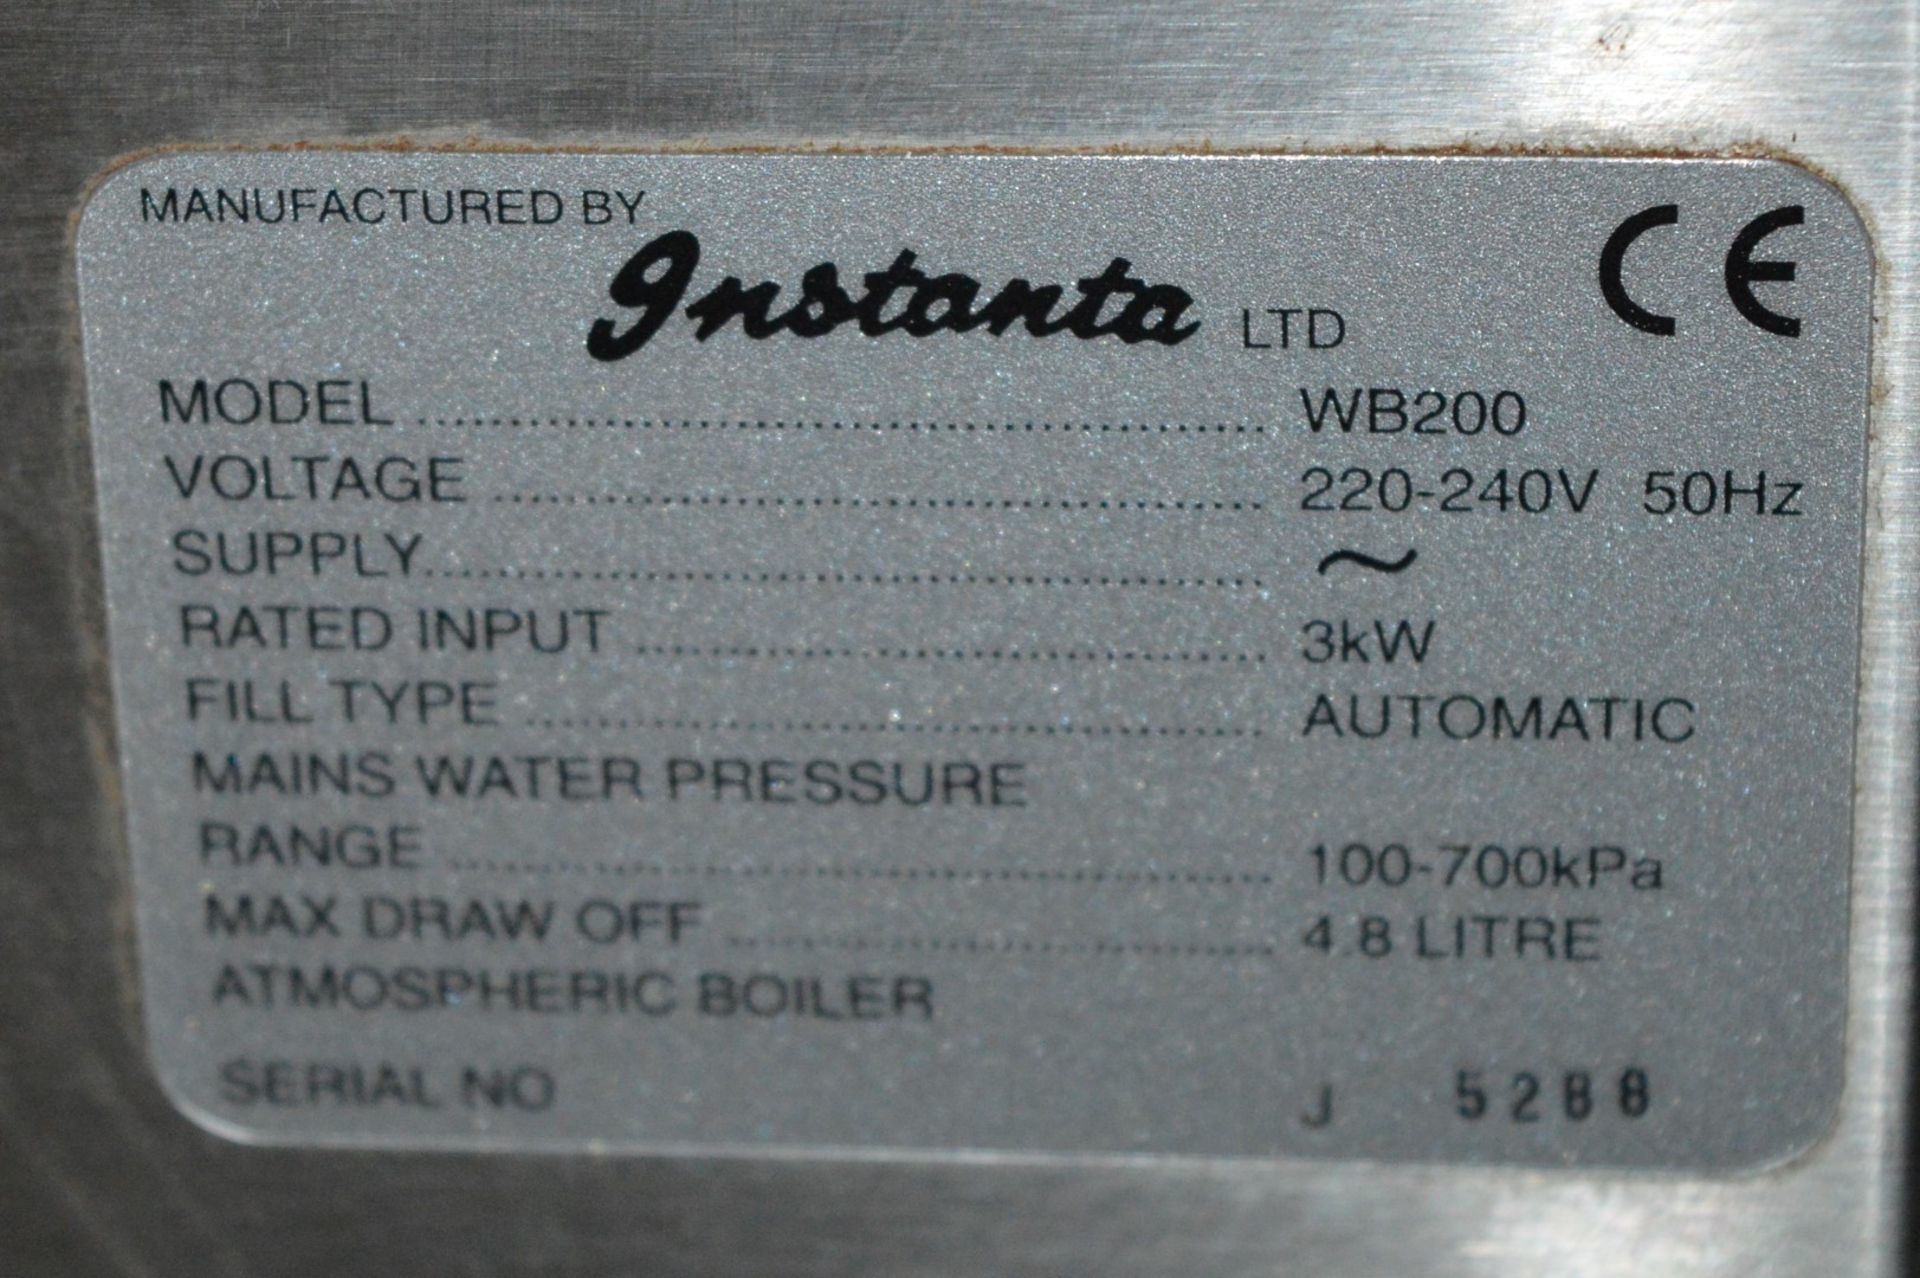 1 x Instanta WB200 Autofill Thermostat Controlled Water Boiler - Stainless Steel Finish - 28 Liter - Image 4 of 4